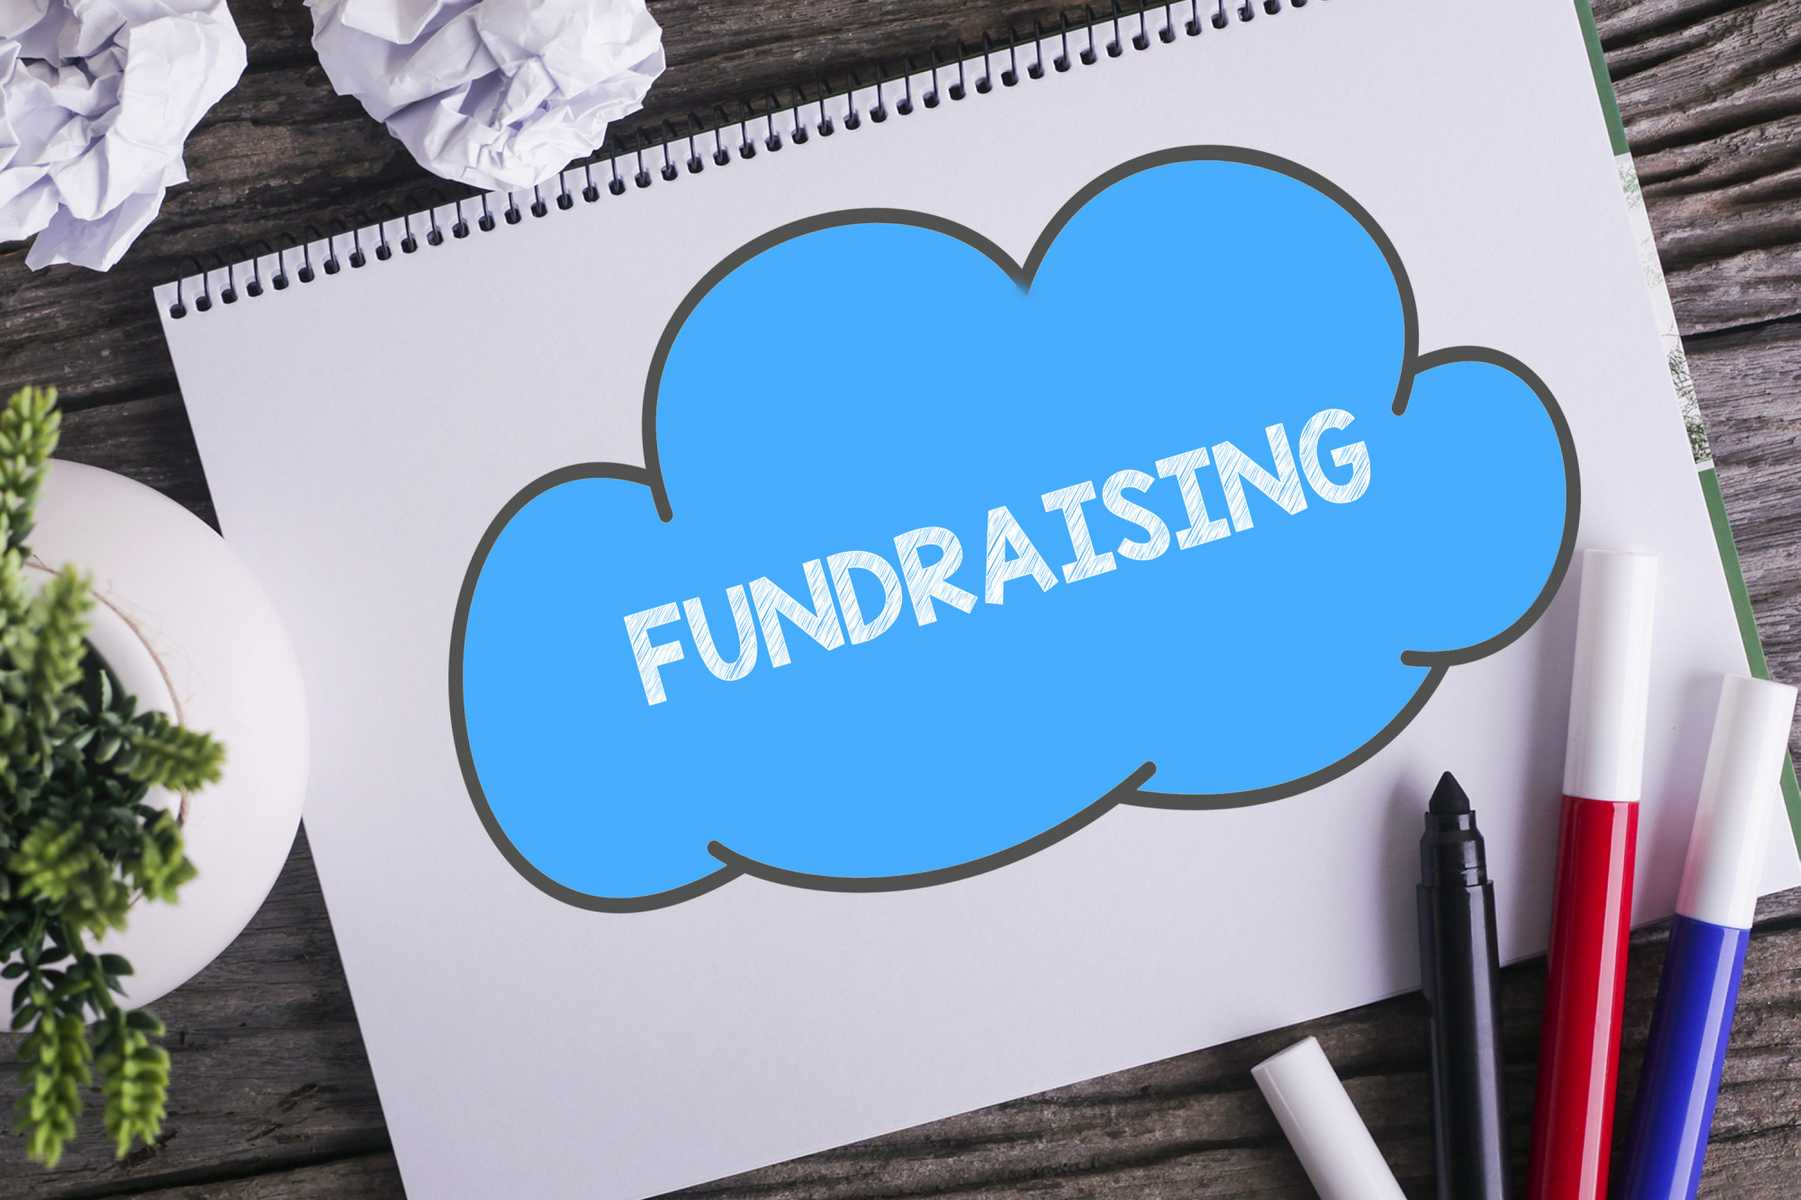 The best practices for fundraising